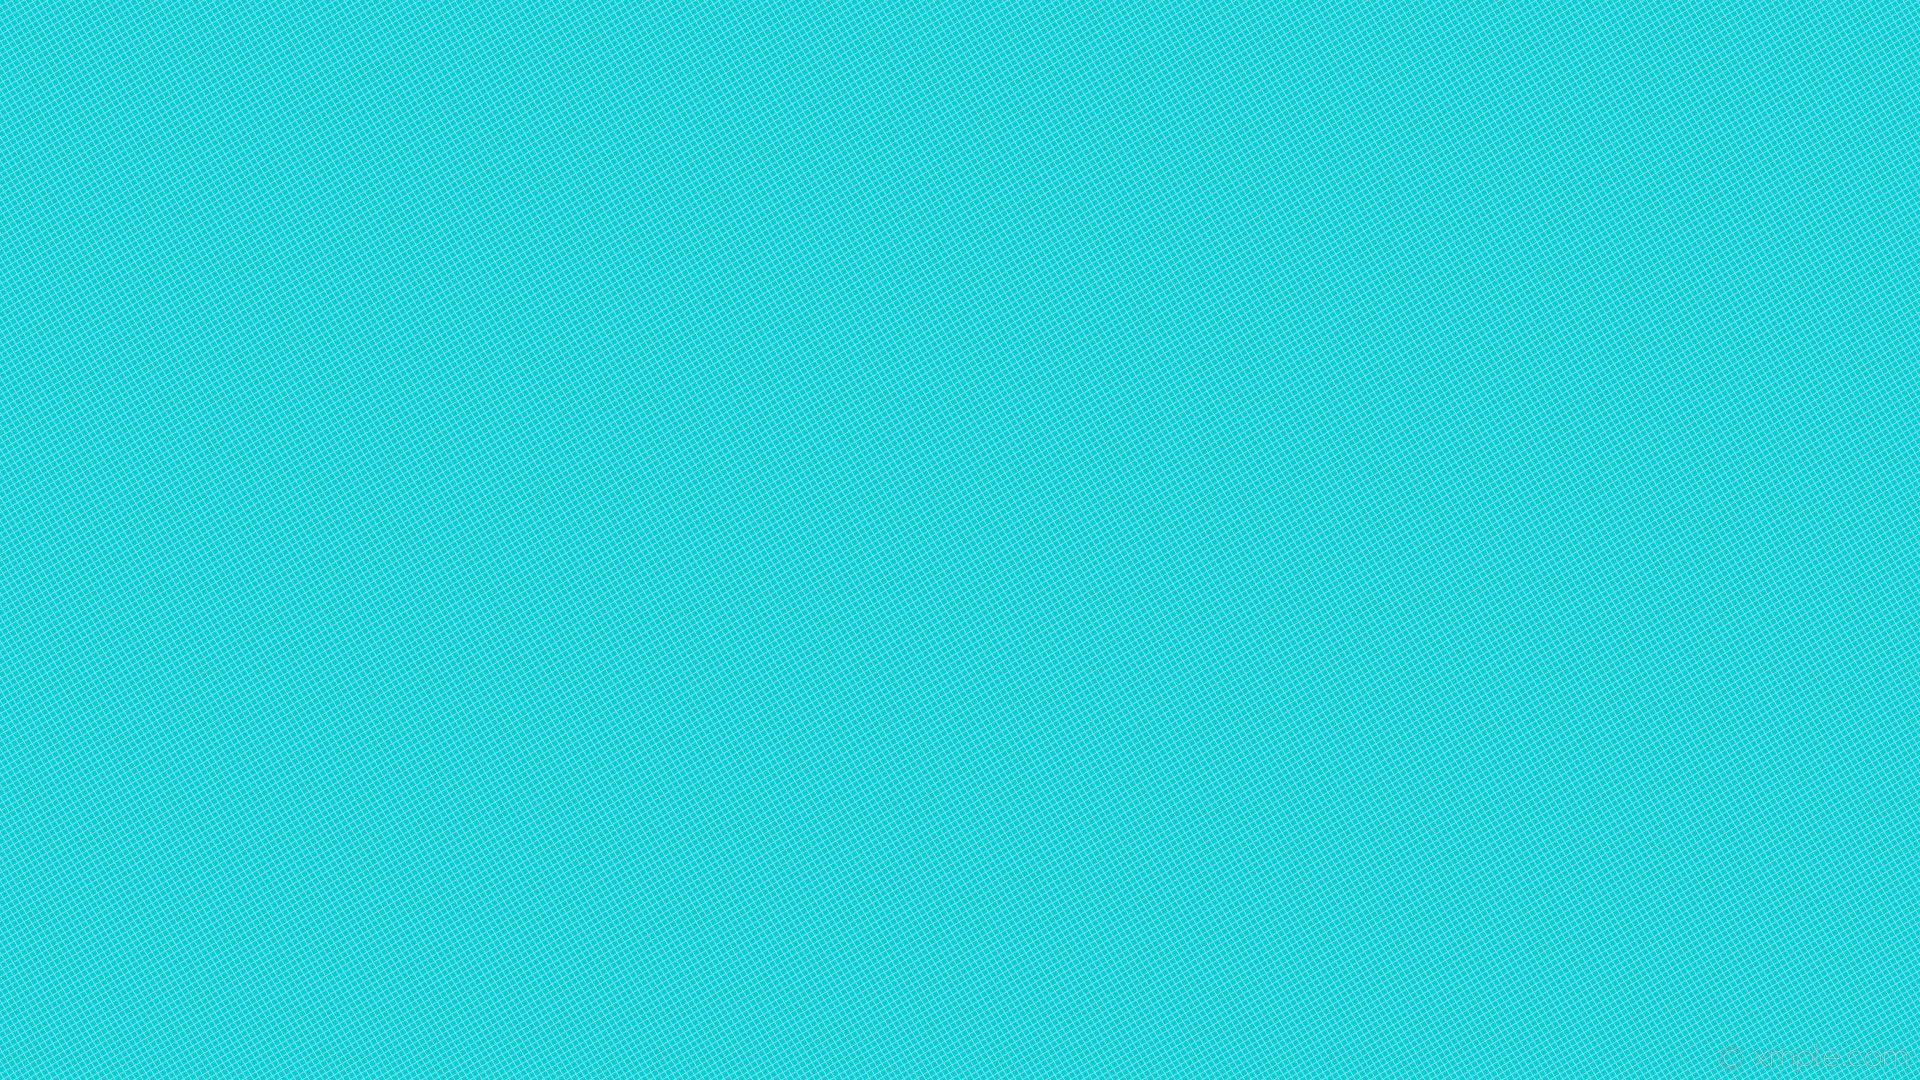 Free Tiffany Blue Wallpaper Downloads, [100+] Tiffany Blue Wallpapers for  FREE 